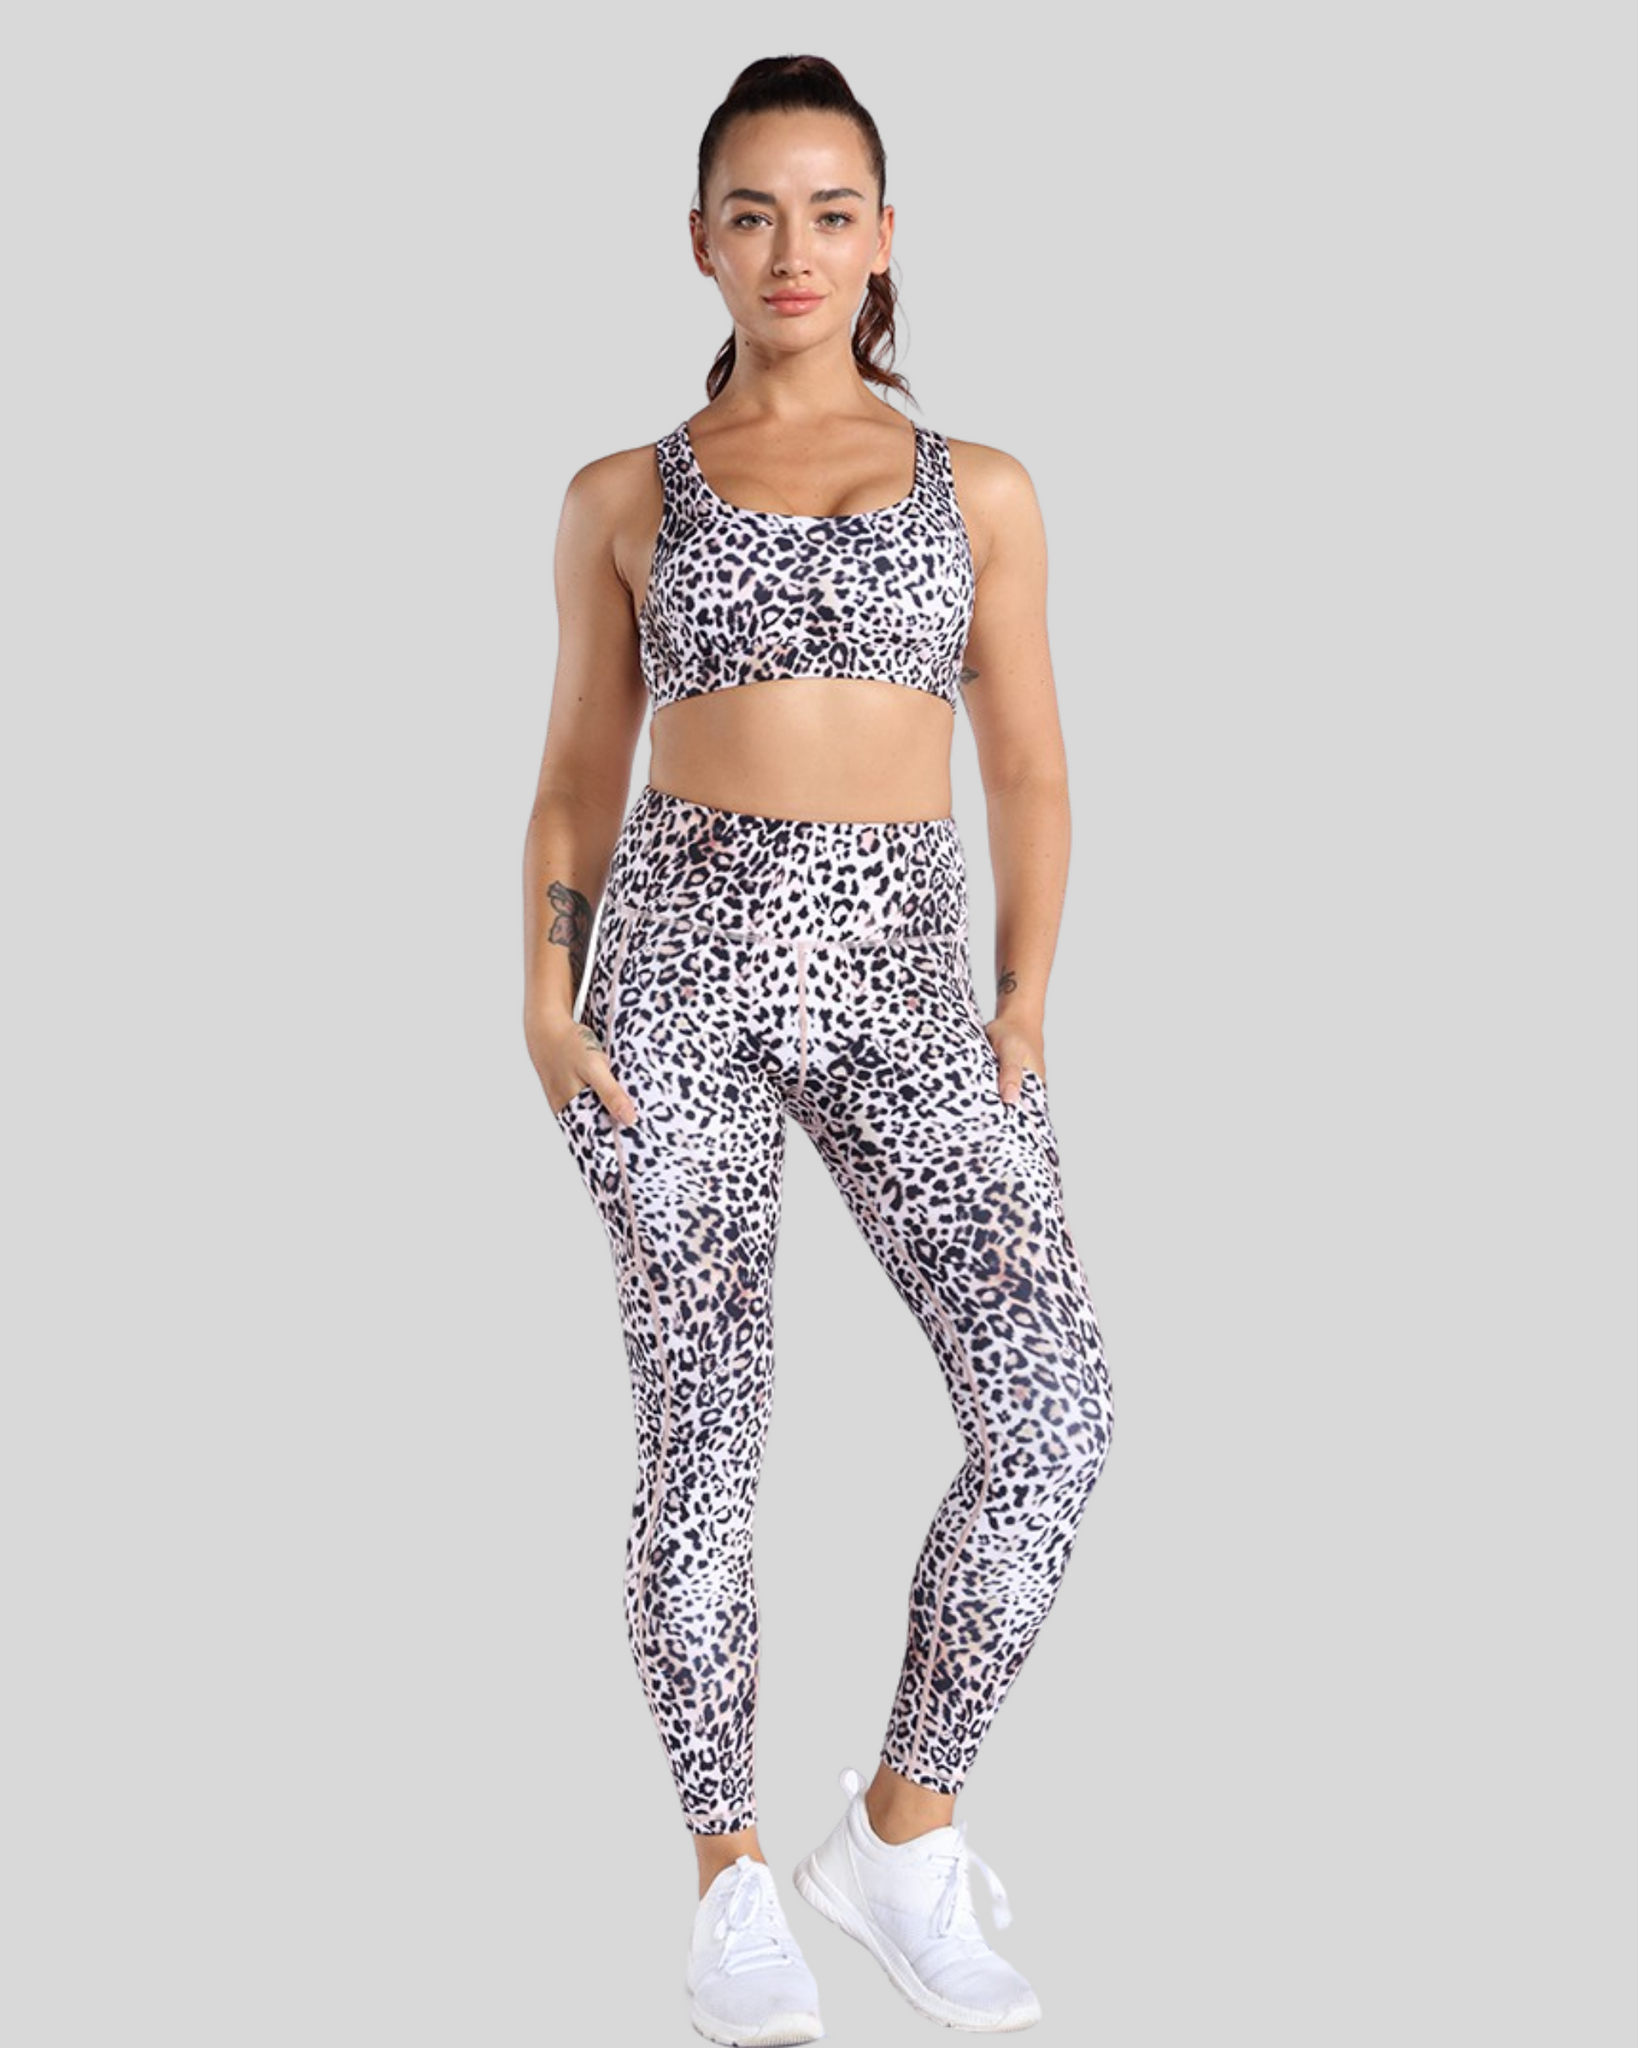 Women's Floral Cross Front Top And Mesh Detailed Leggings | Floral yoga  pants, Cross front top, Suits for women